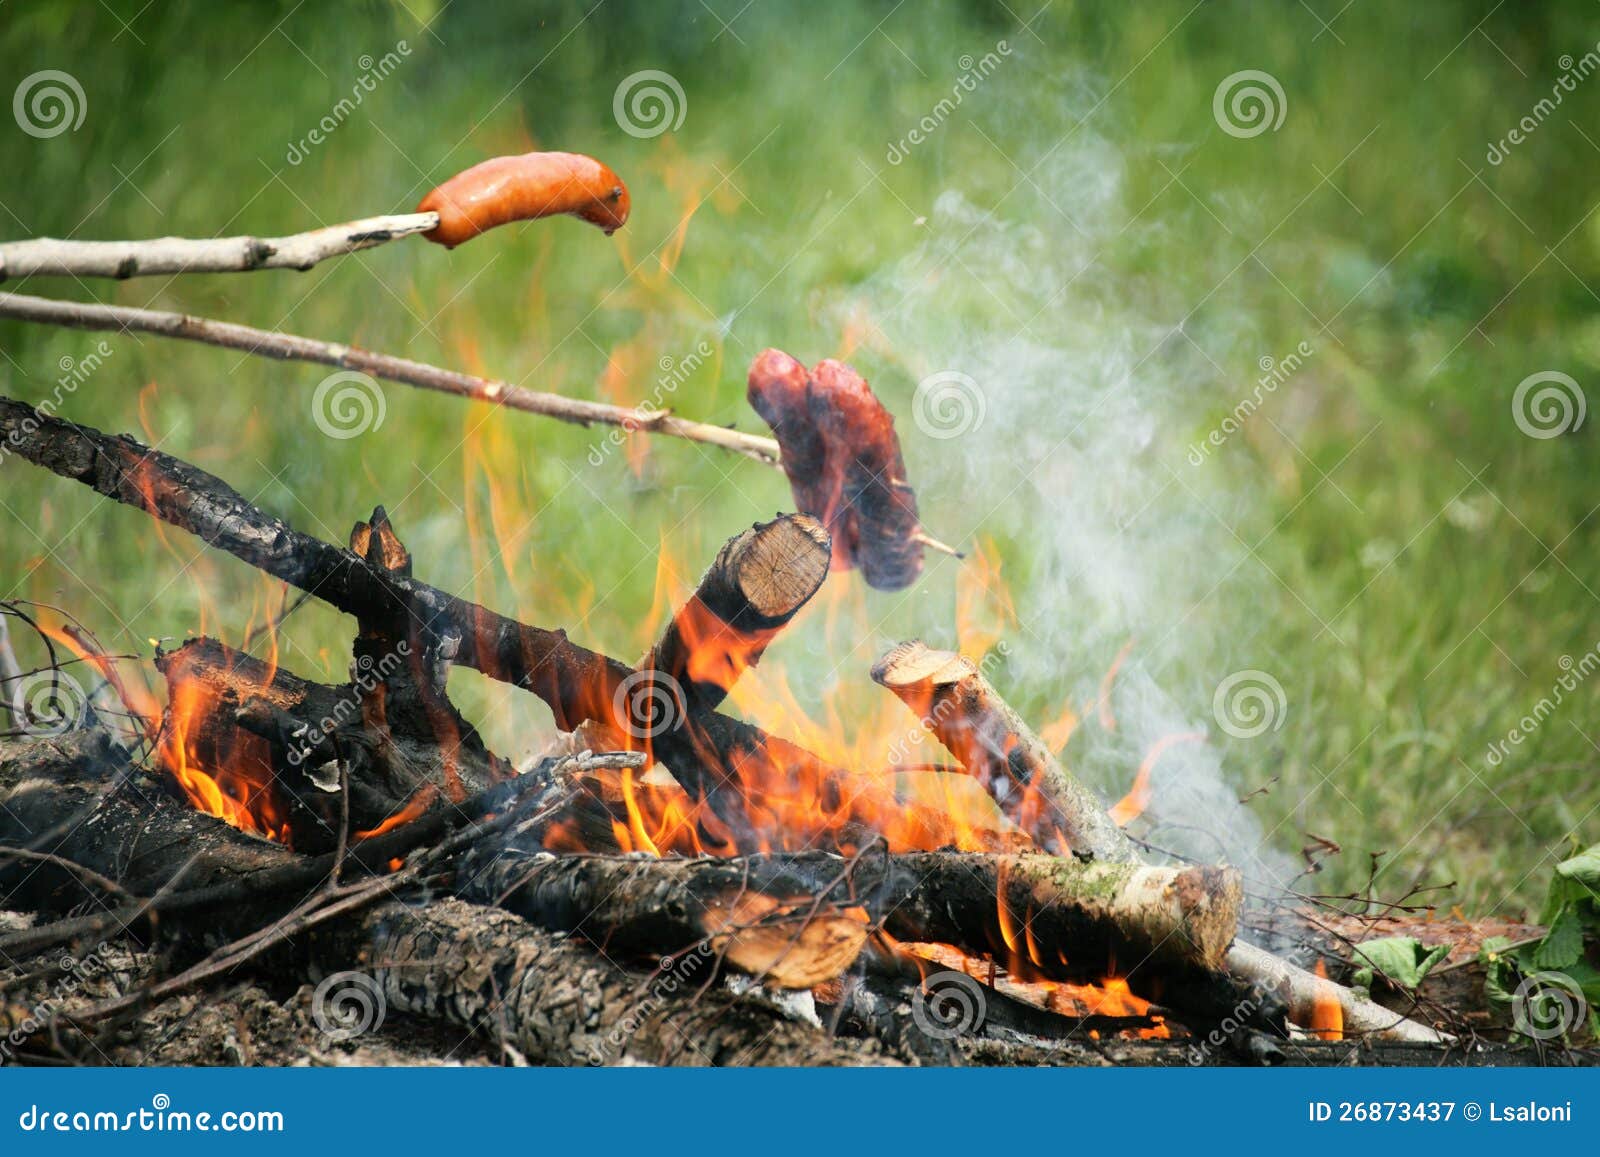 Bonfire Campfire Fire Flames Grilling Steak on the BBQ Stock Image ...